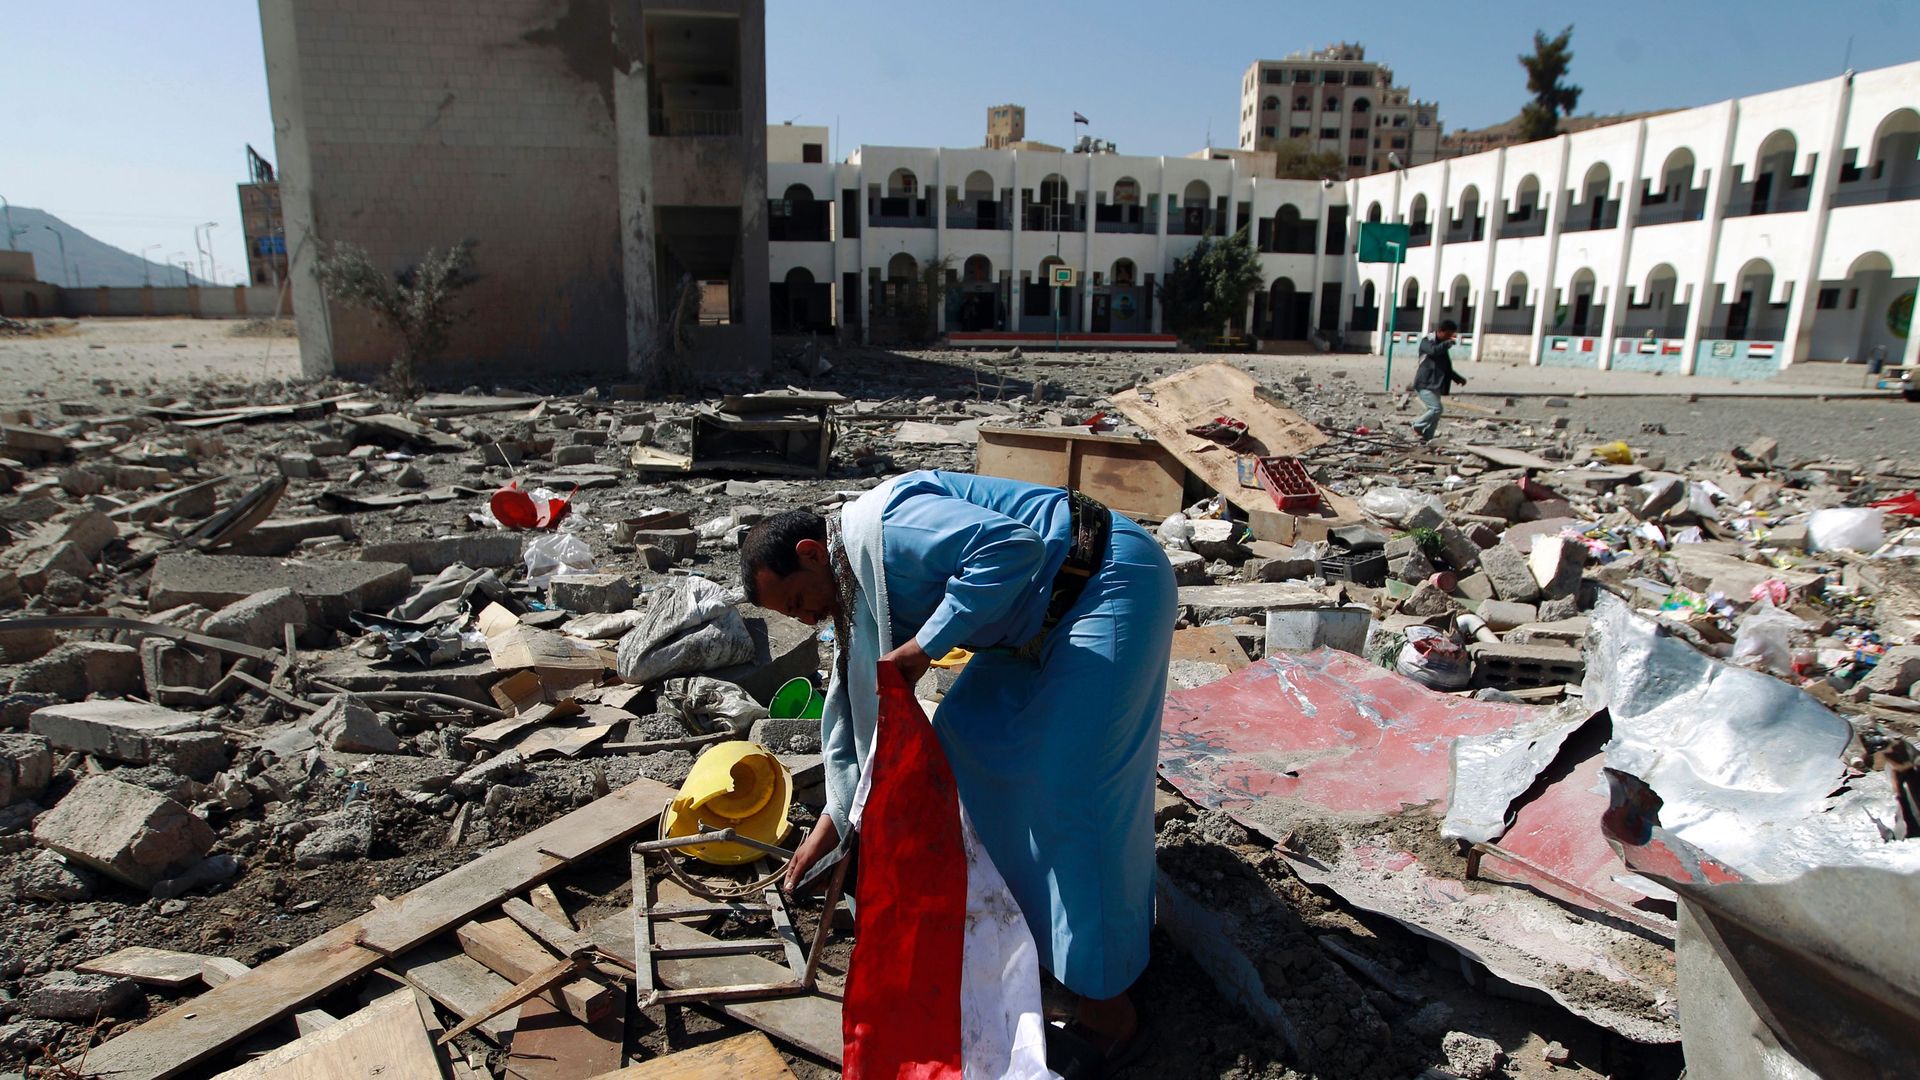 In this image, a man in Yemen holds a flag while searching through rubble. 